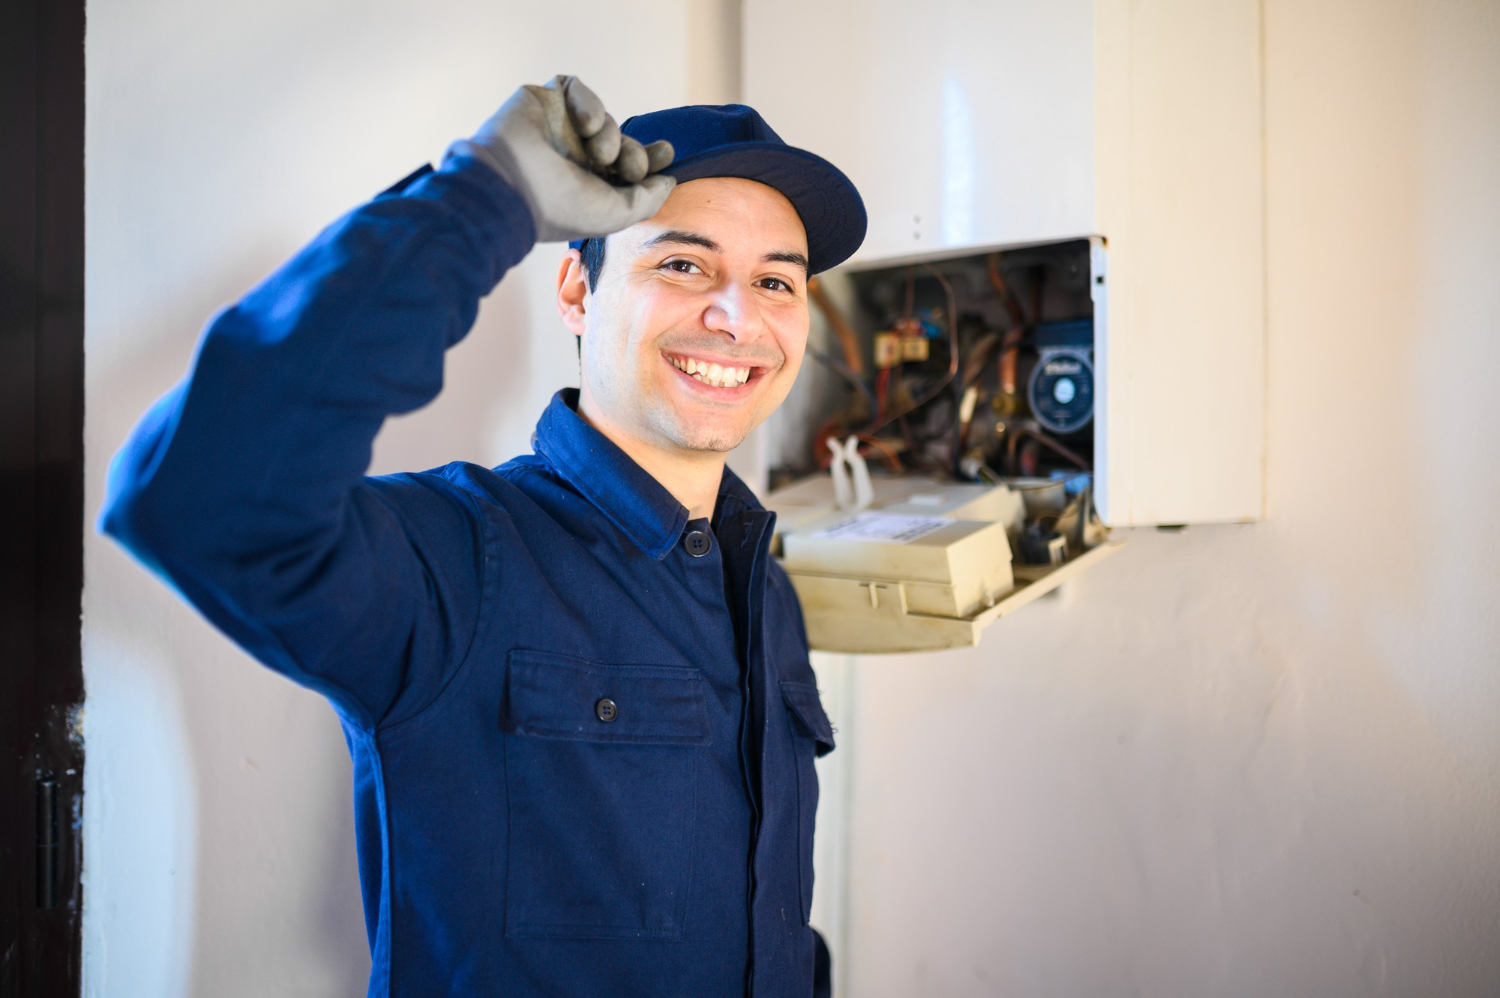 cropped plumber smiling on camera while fixing boiler behind him